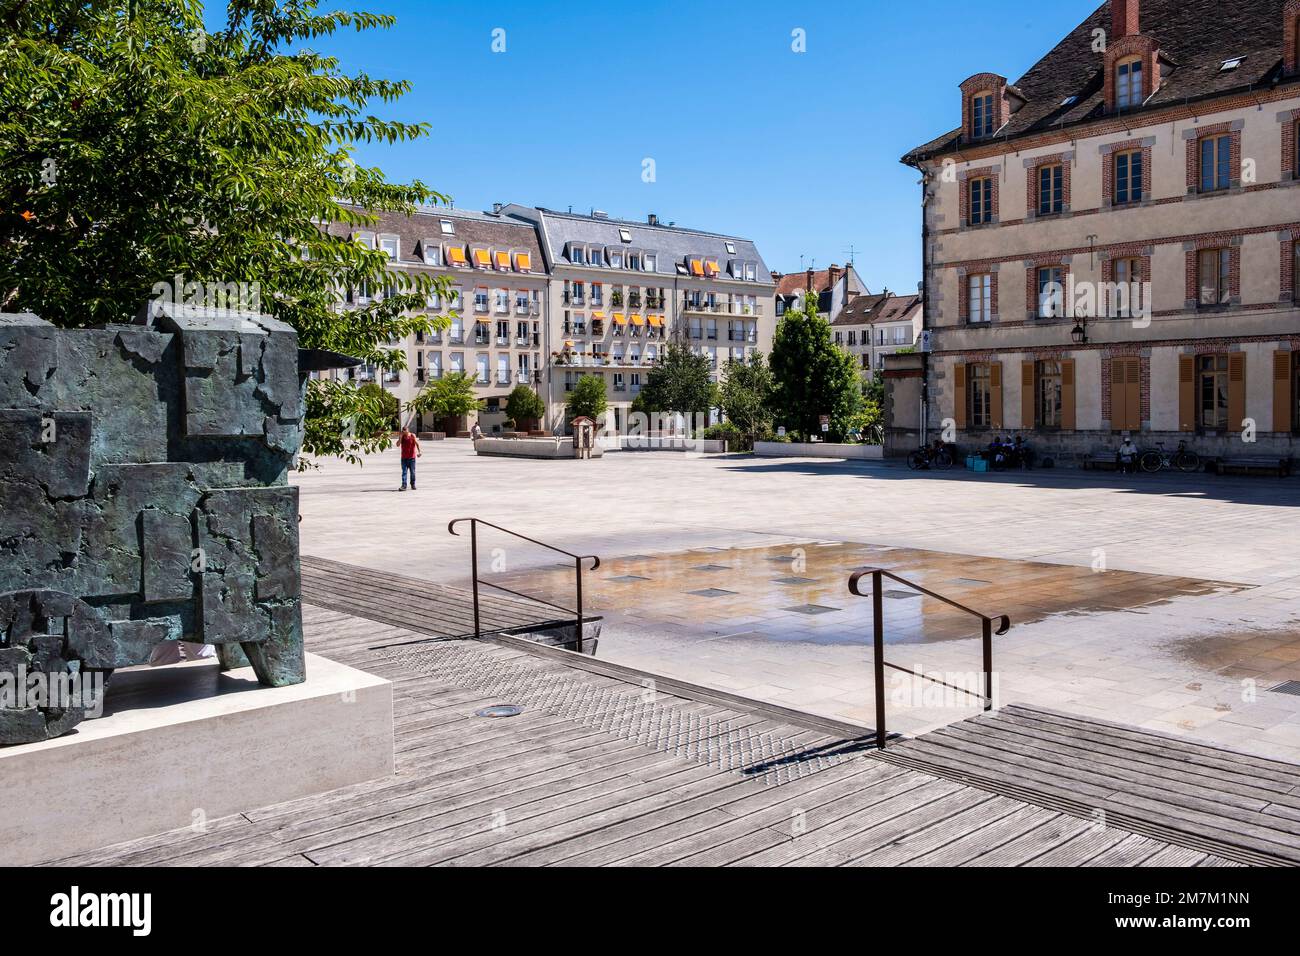 Fontainebleau (Paris area, France): 'place du marche' square in the city centre. Building facades giving onto the pedestrianized square the tourist of Stock Photo